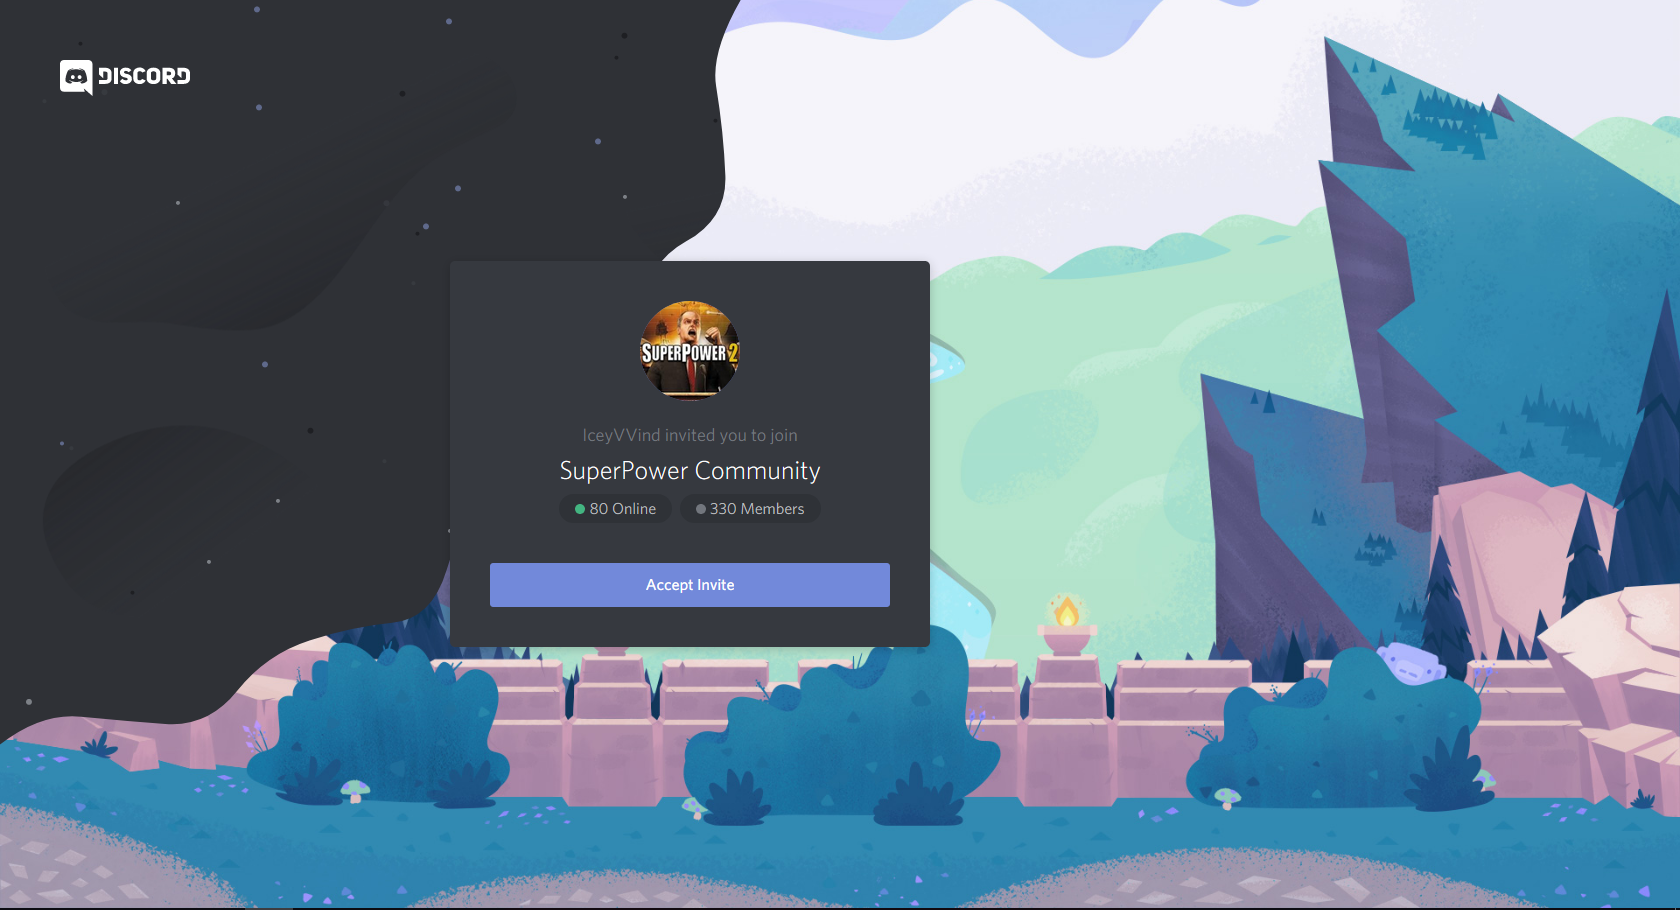 Superpower Community Discord Superpowerwiki Fandom Powered By Wikia - the superpower 2 community discord was created on september 21st 2017 by jesse in pensacola flo!   rida the discord was created for better communication